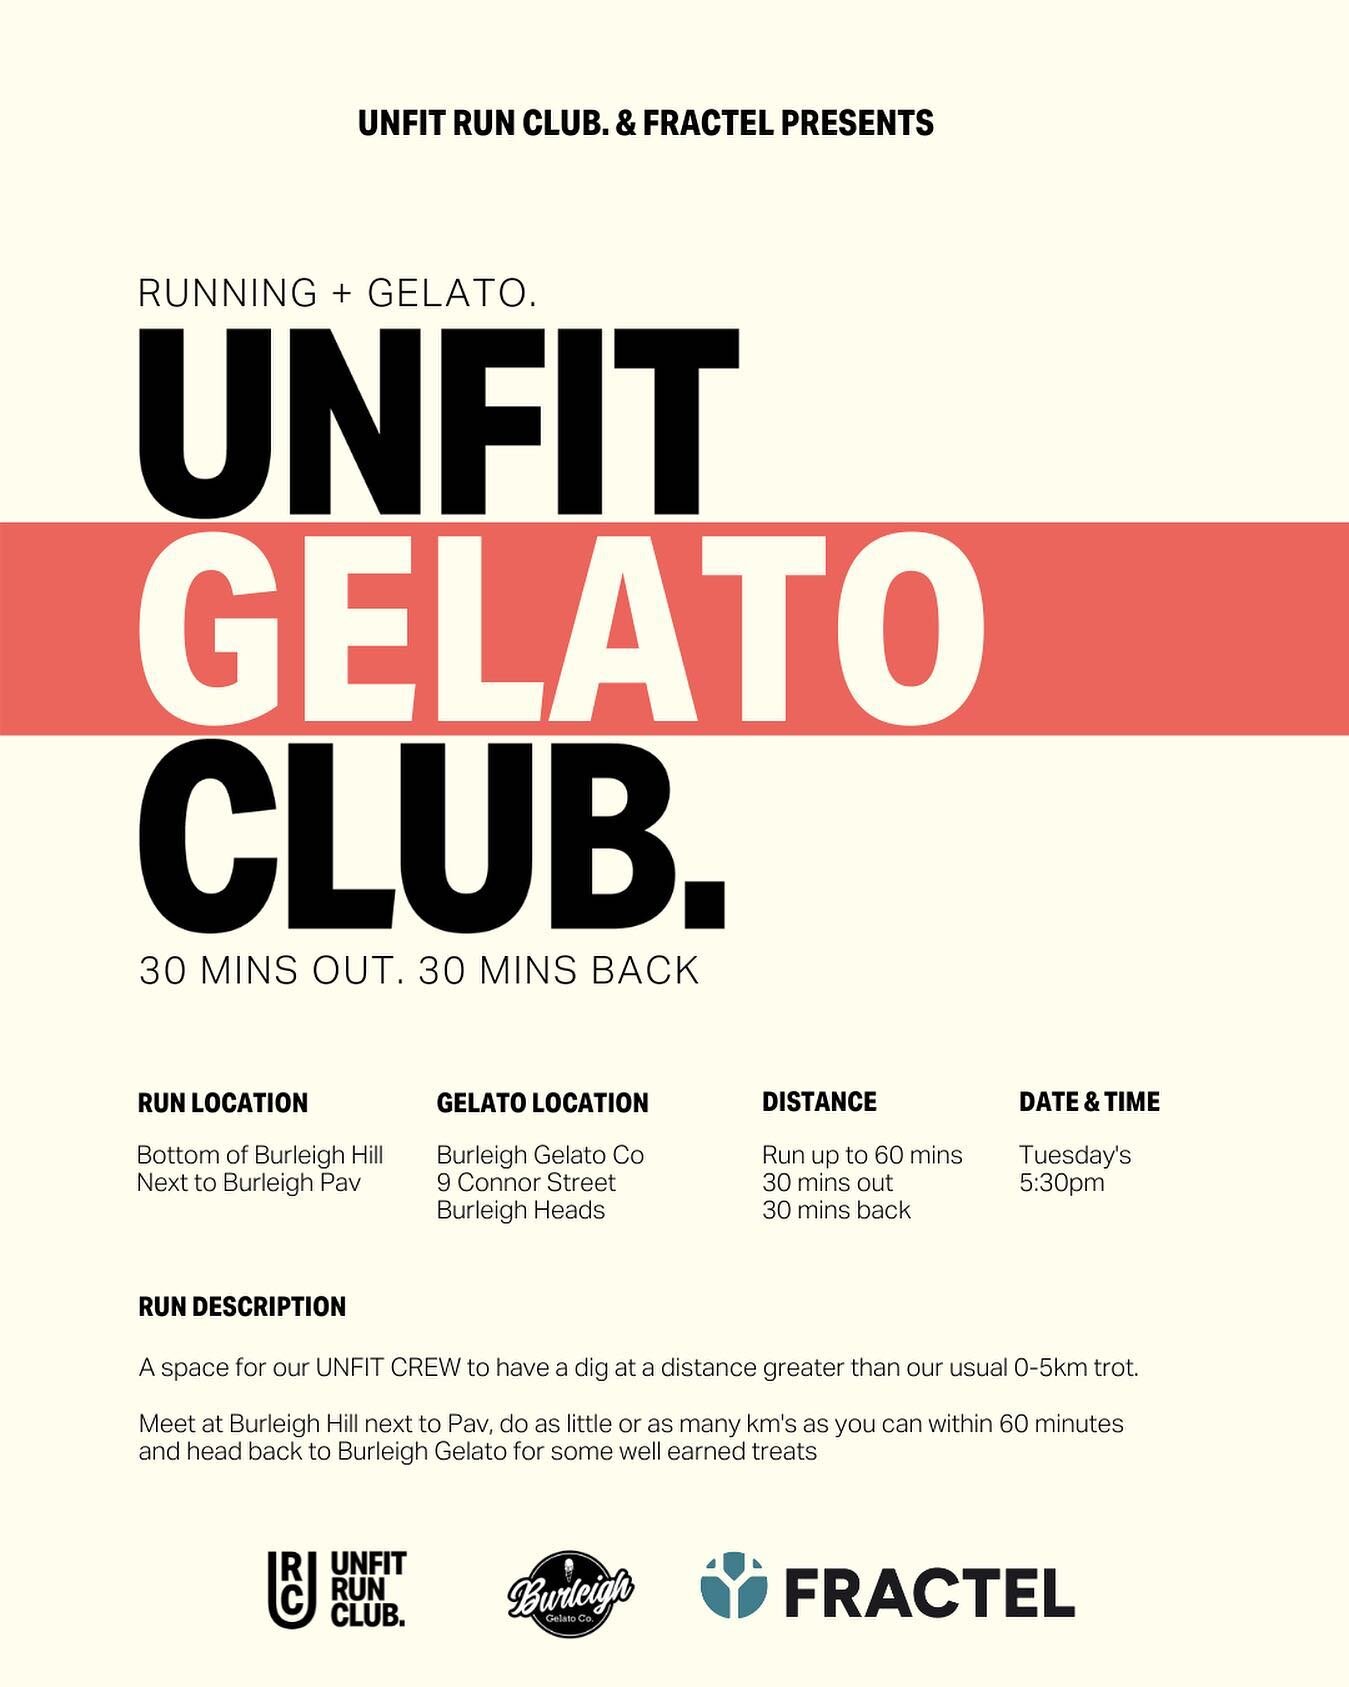 🚀 UNFIT FAM LEGIT COULD NOT BE MORE PUMPED FOR THIS 🚀

Collaboration: 02

Starting next Tuesday 13/9 the next phase of our collaboration project is set to launch. 

@unfitrunclub @fractelrunning &amp; @burleighgelatoco present

UNFIT GELATO CLUB. 
